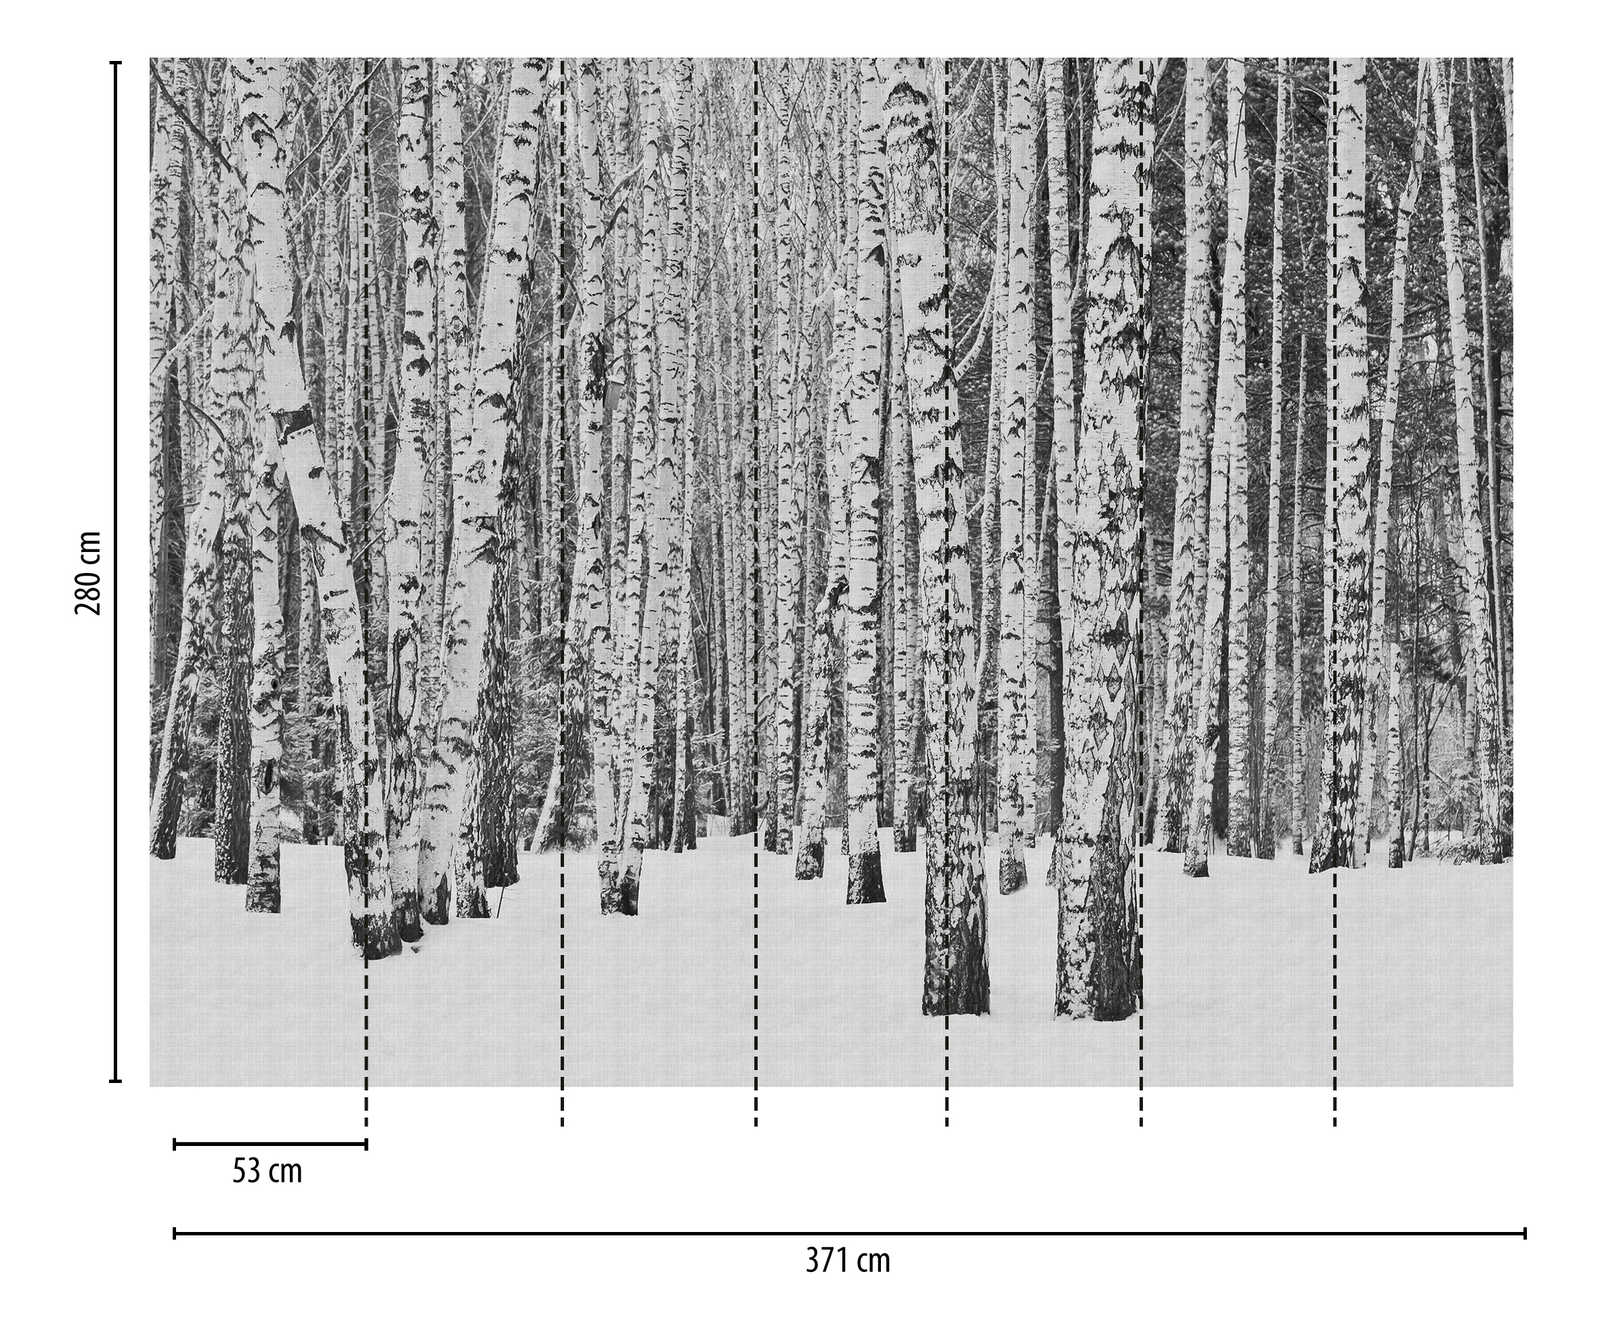             Wallpaper novelty | motif wallpaper birch forest in the snow, black and white
        